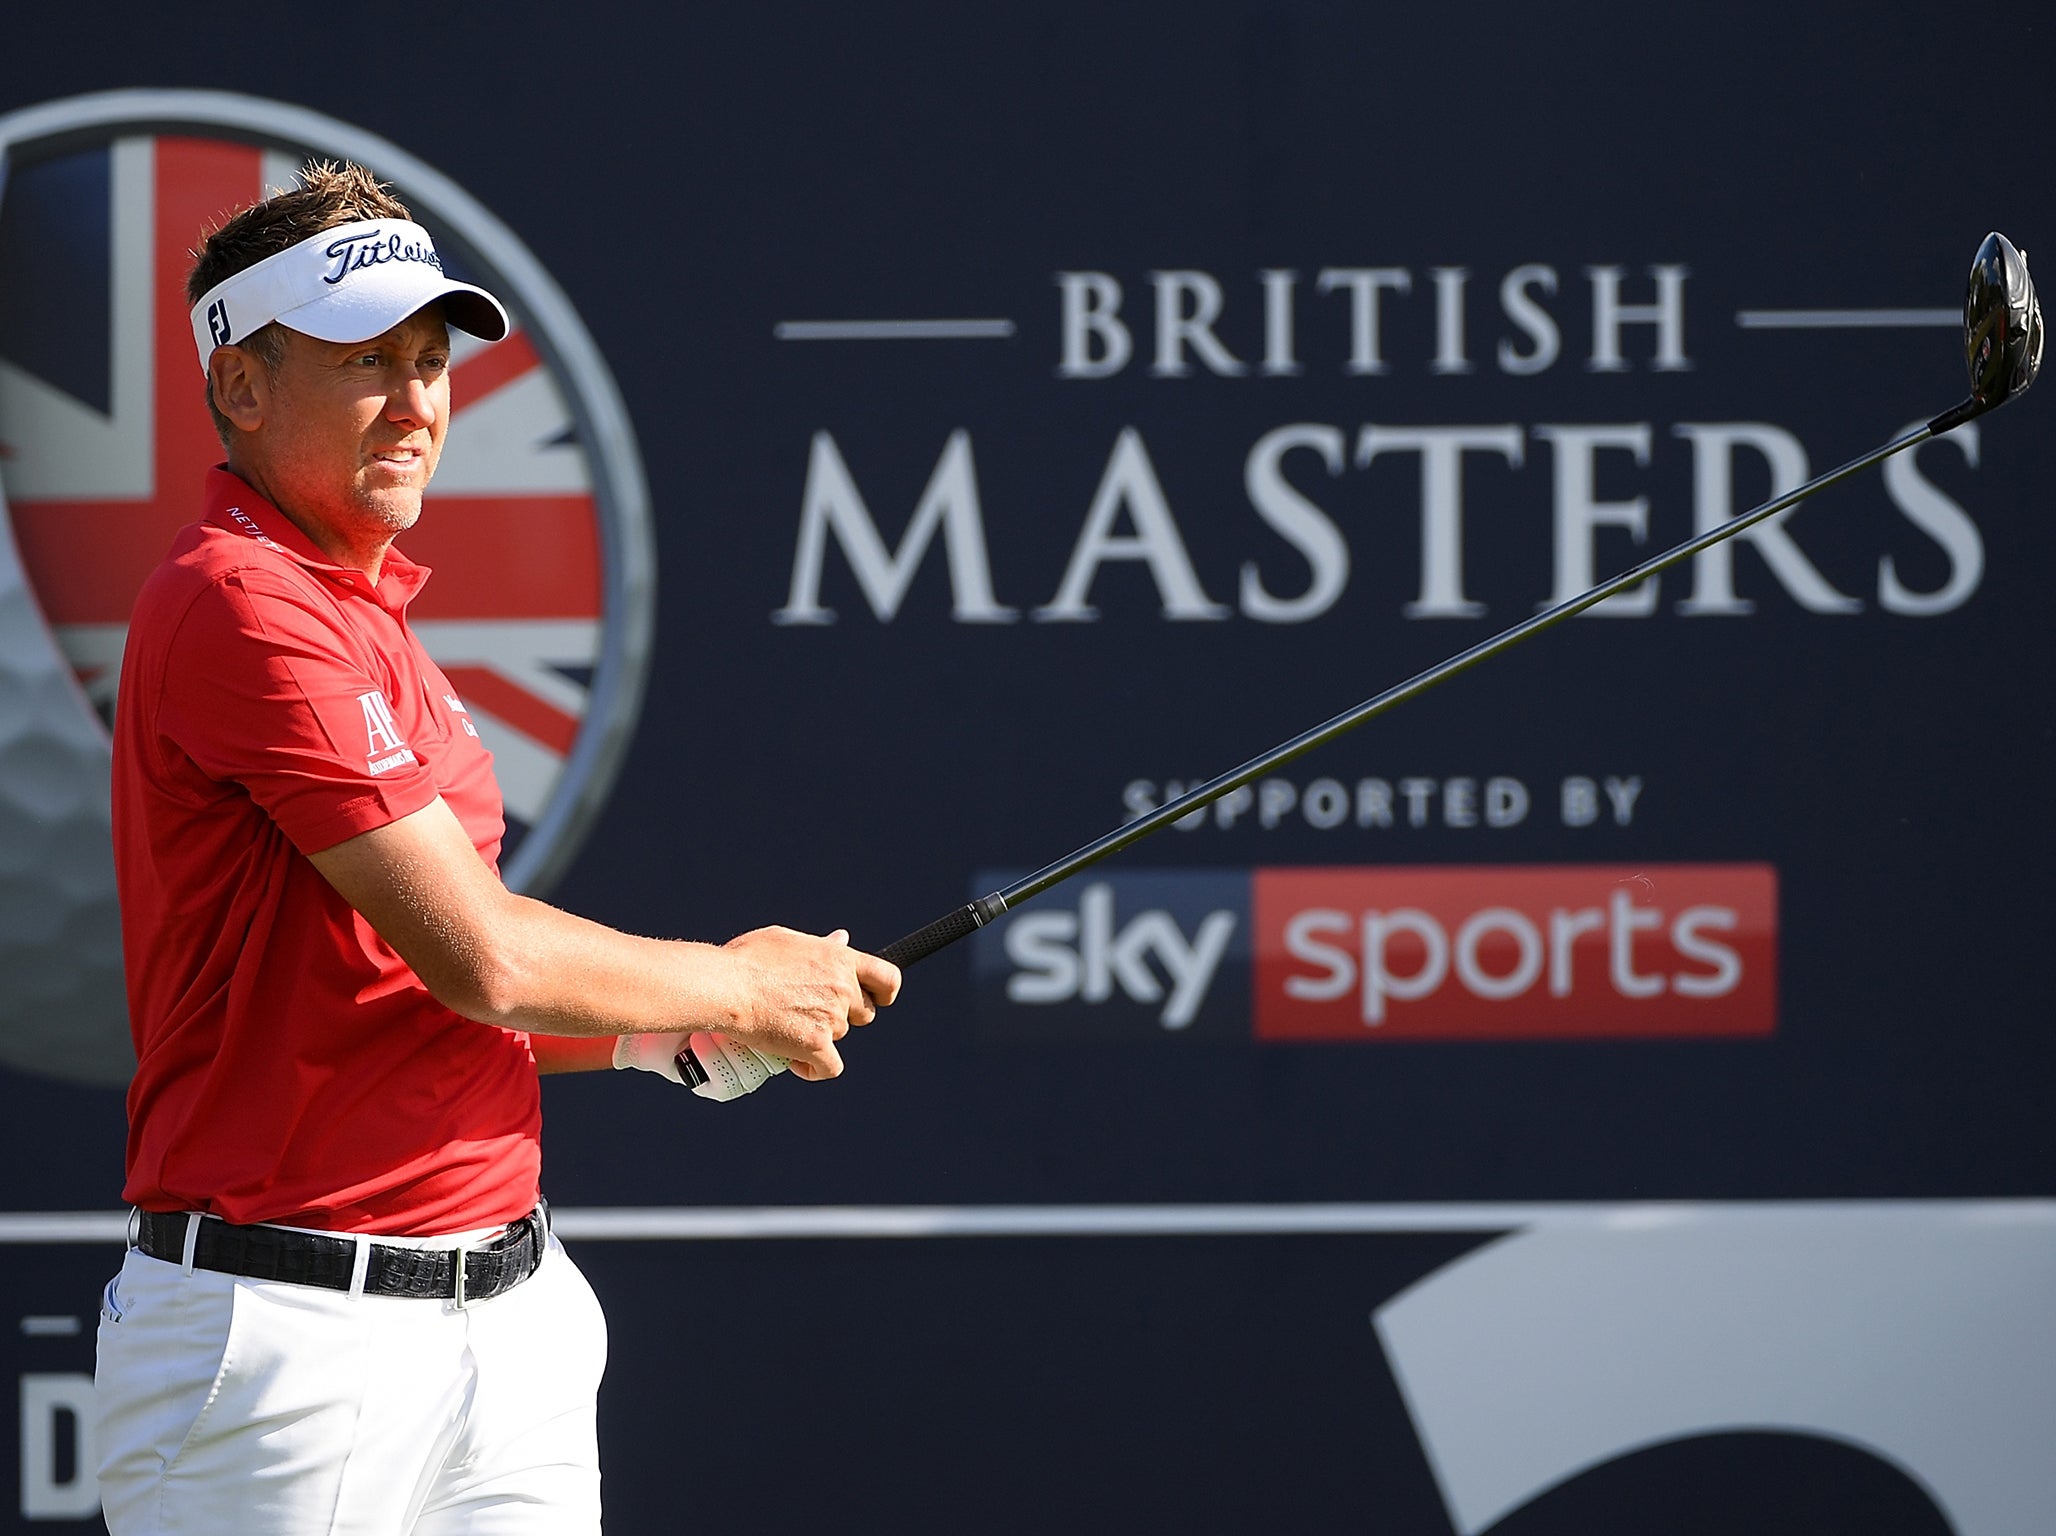 Poulter also moved into contention